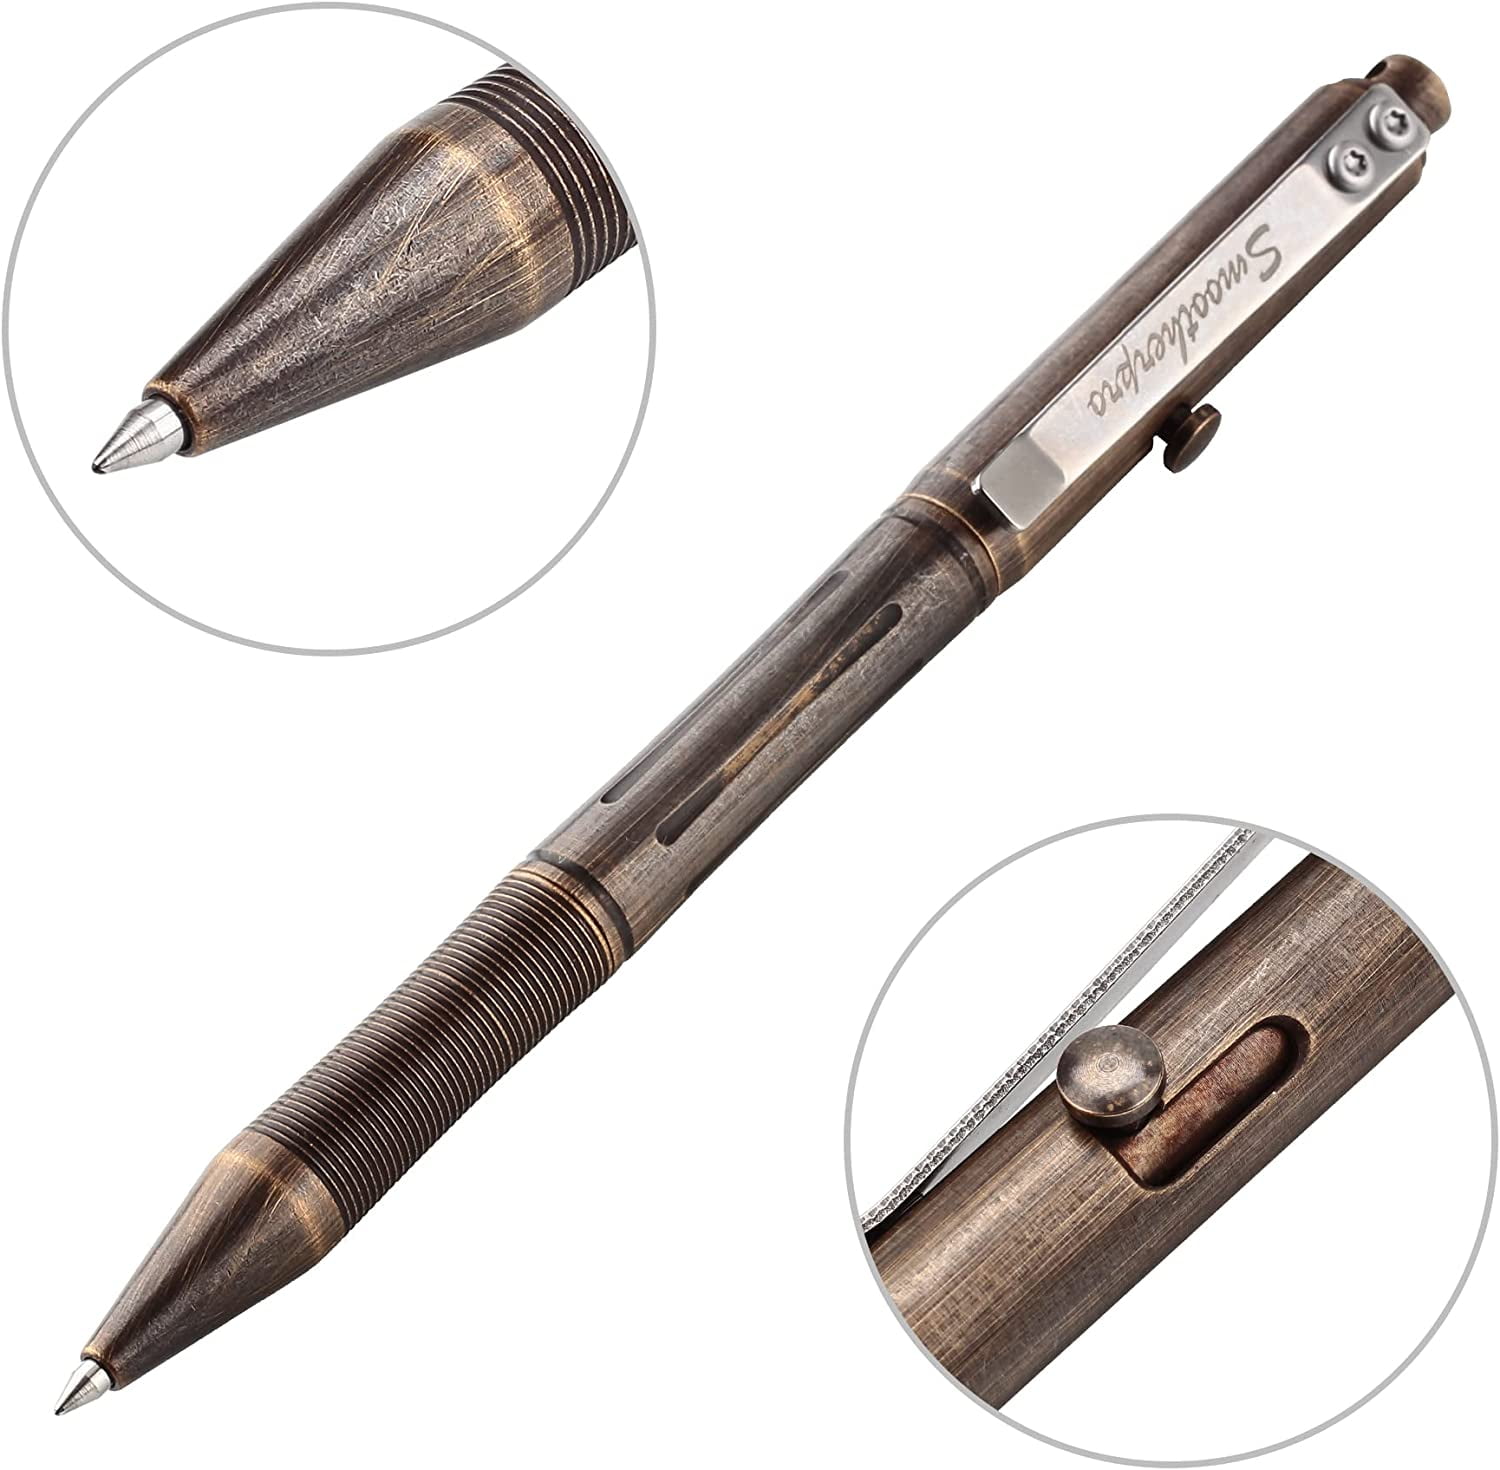 SMOOTHERPRO Heavy Duty Stainless Steel Bolt Action Pen for Tremor